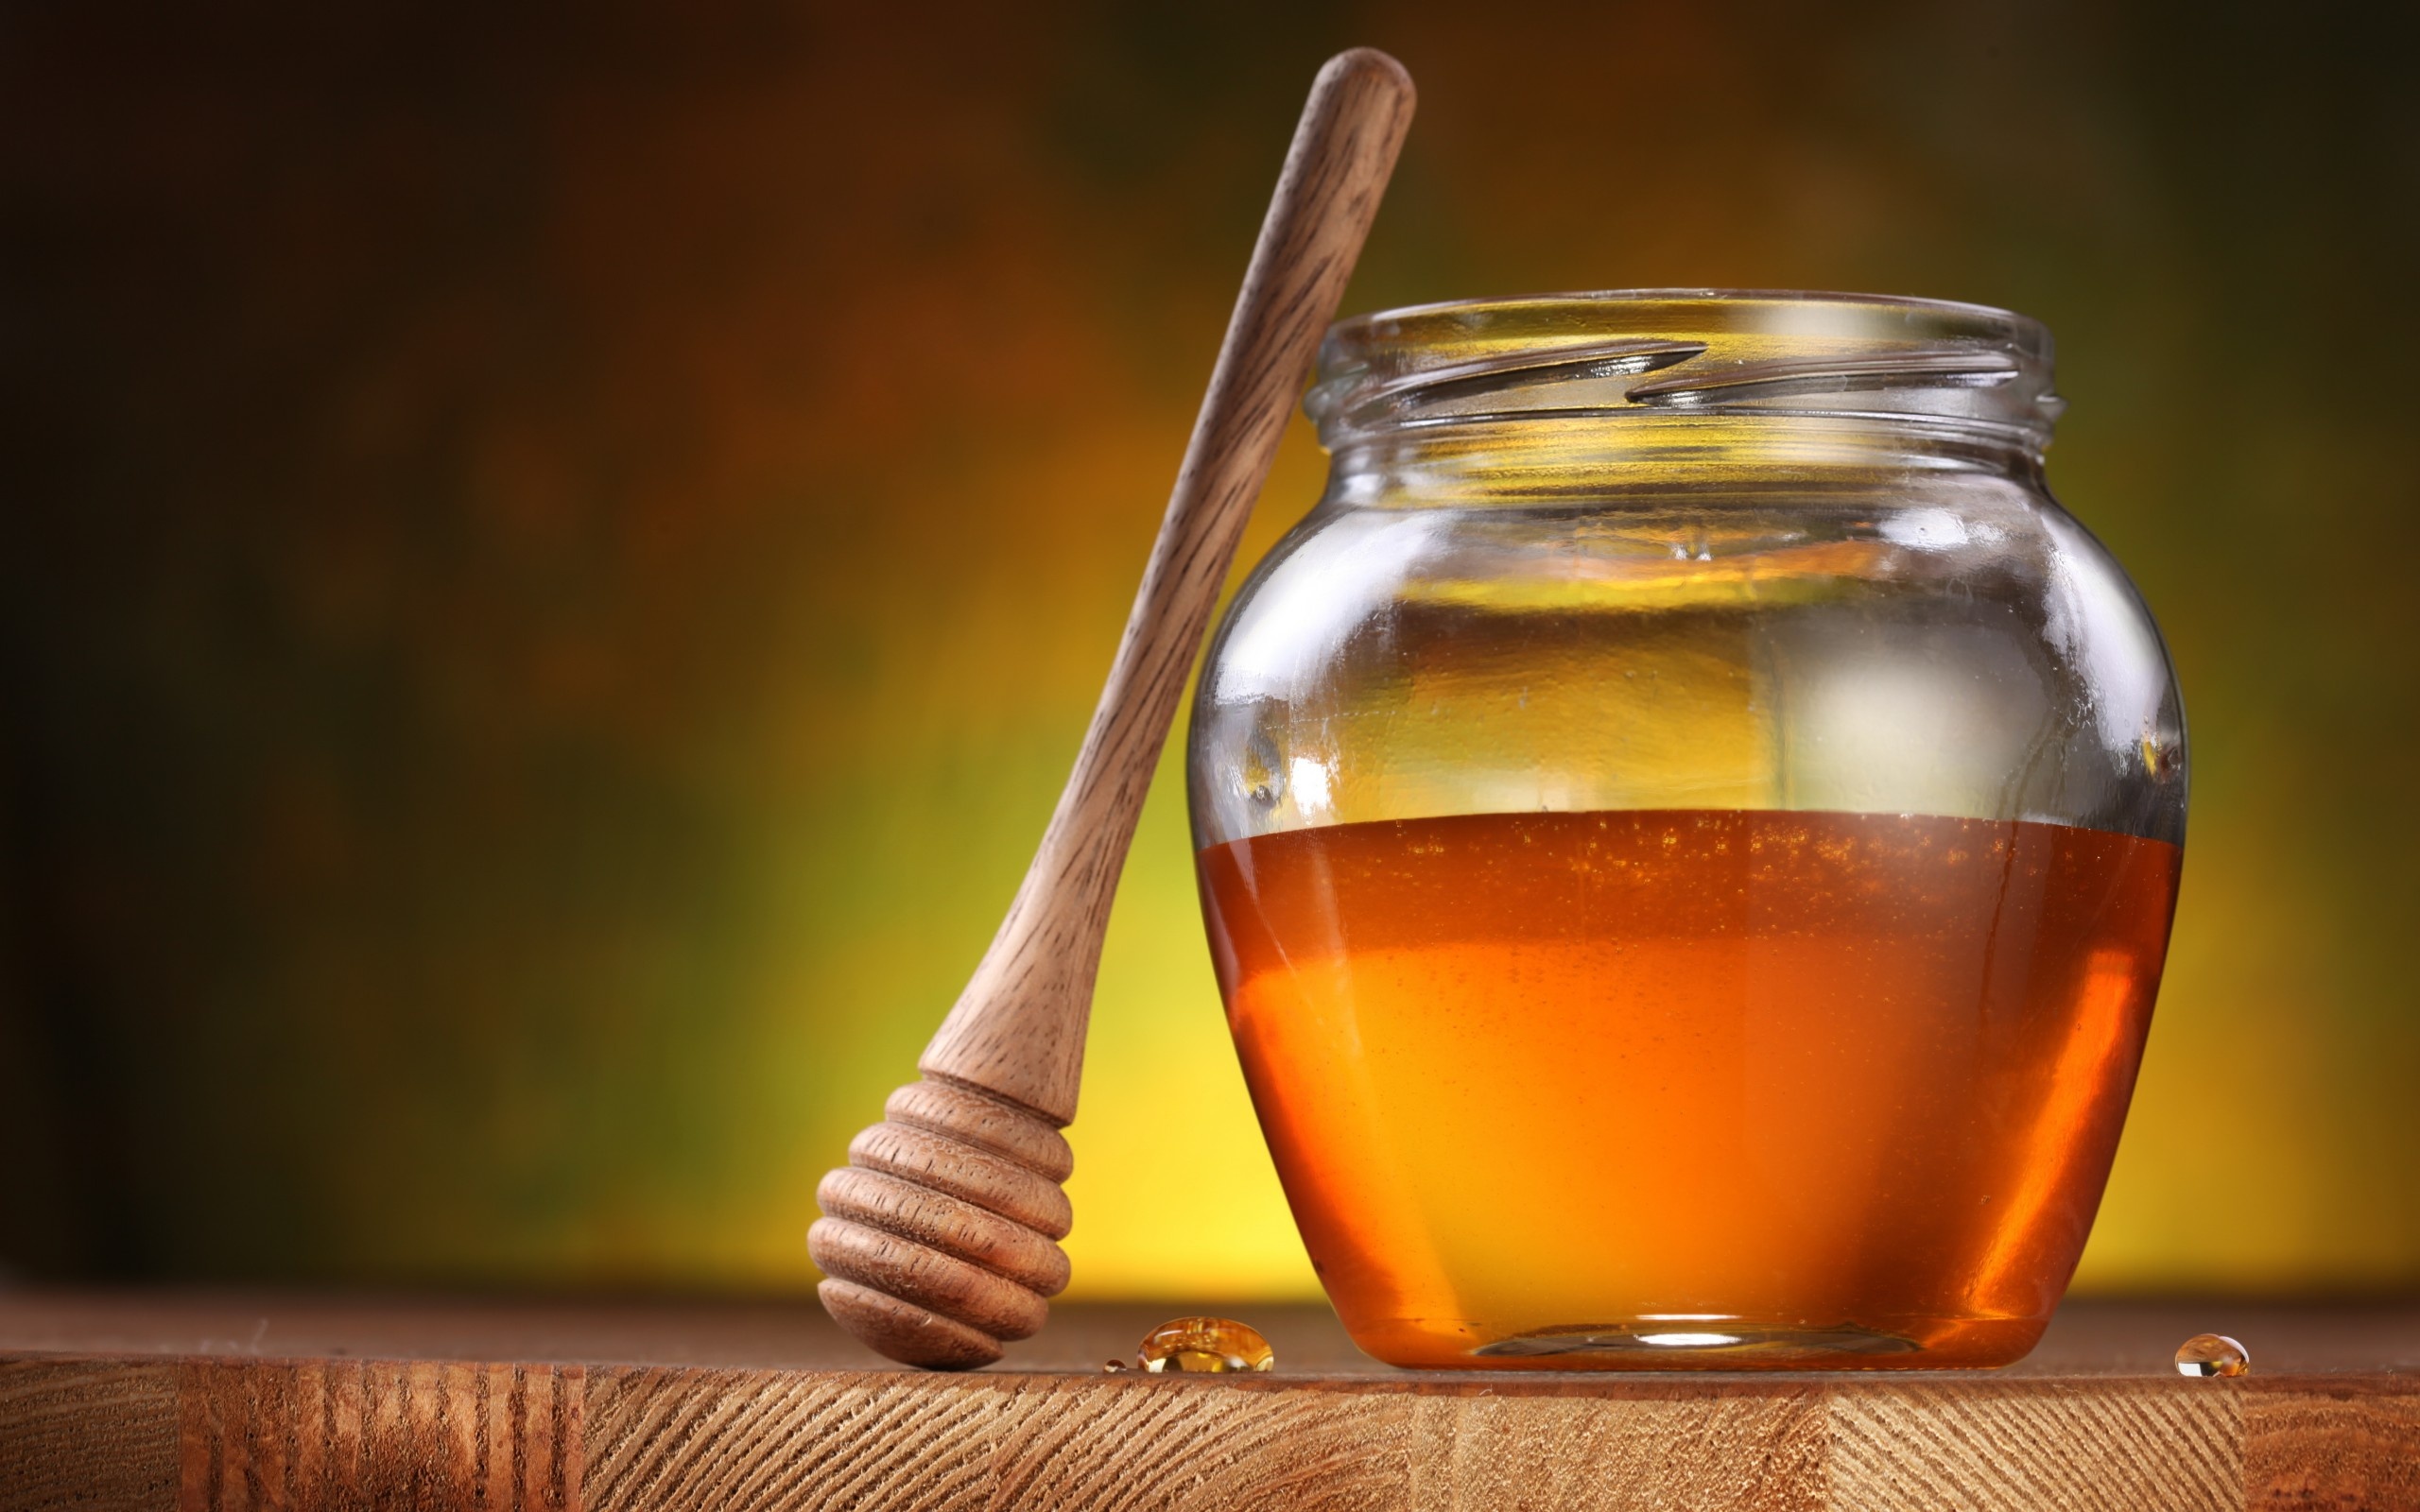 Honey: Rich in health-promoting plant compounds known as polyphenols. 2560x1600 HD Wallpaper.